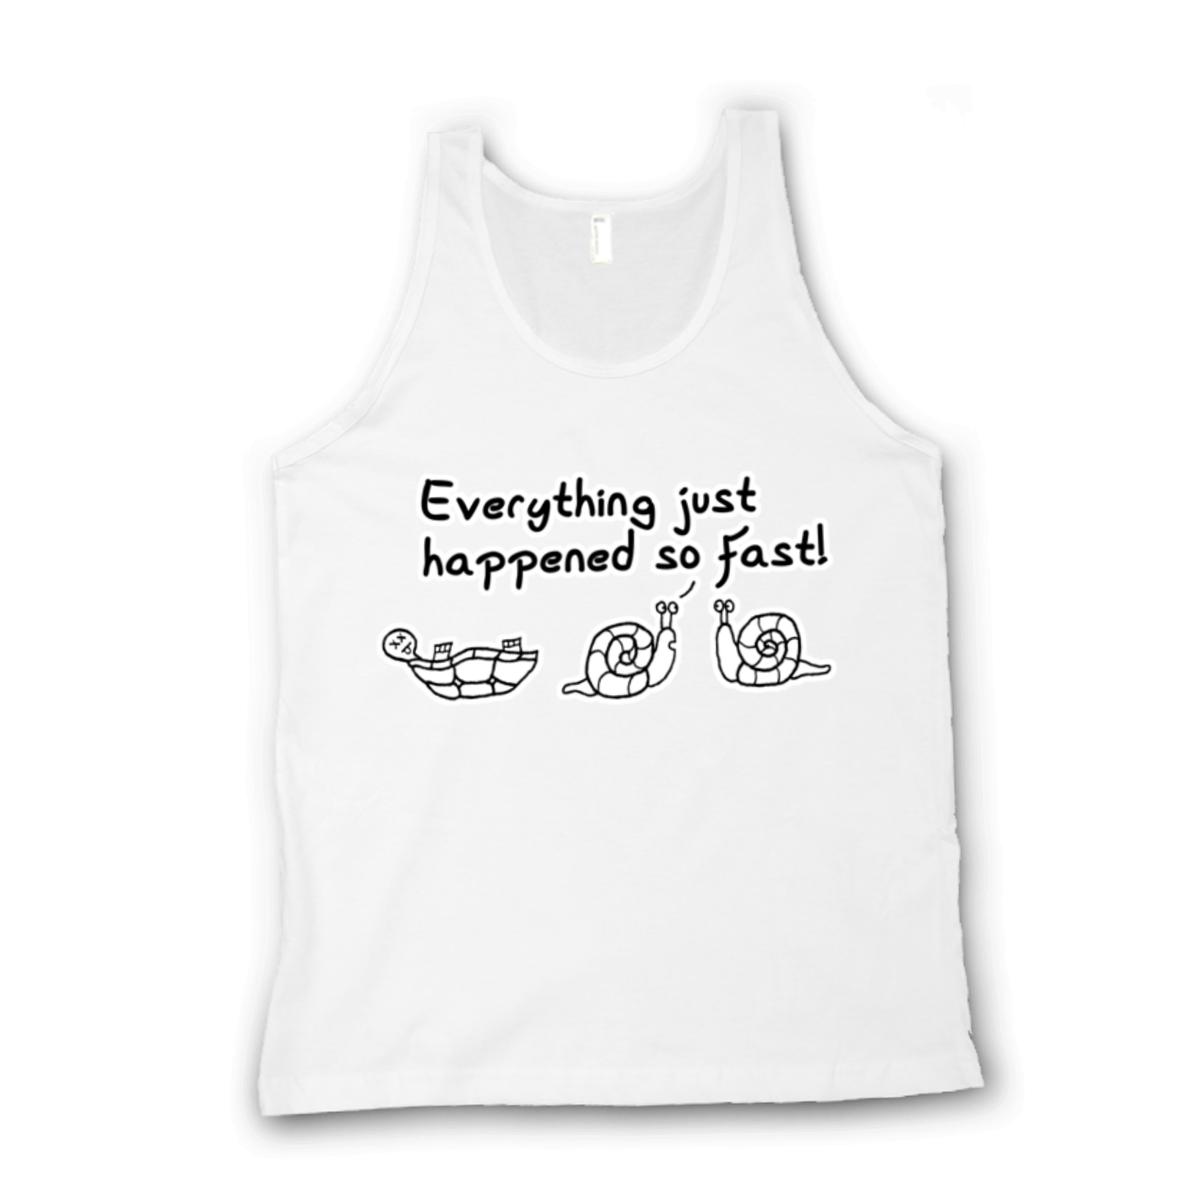 Happened So Fast Unisex Tank Top Double Extra Large white